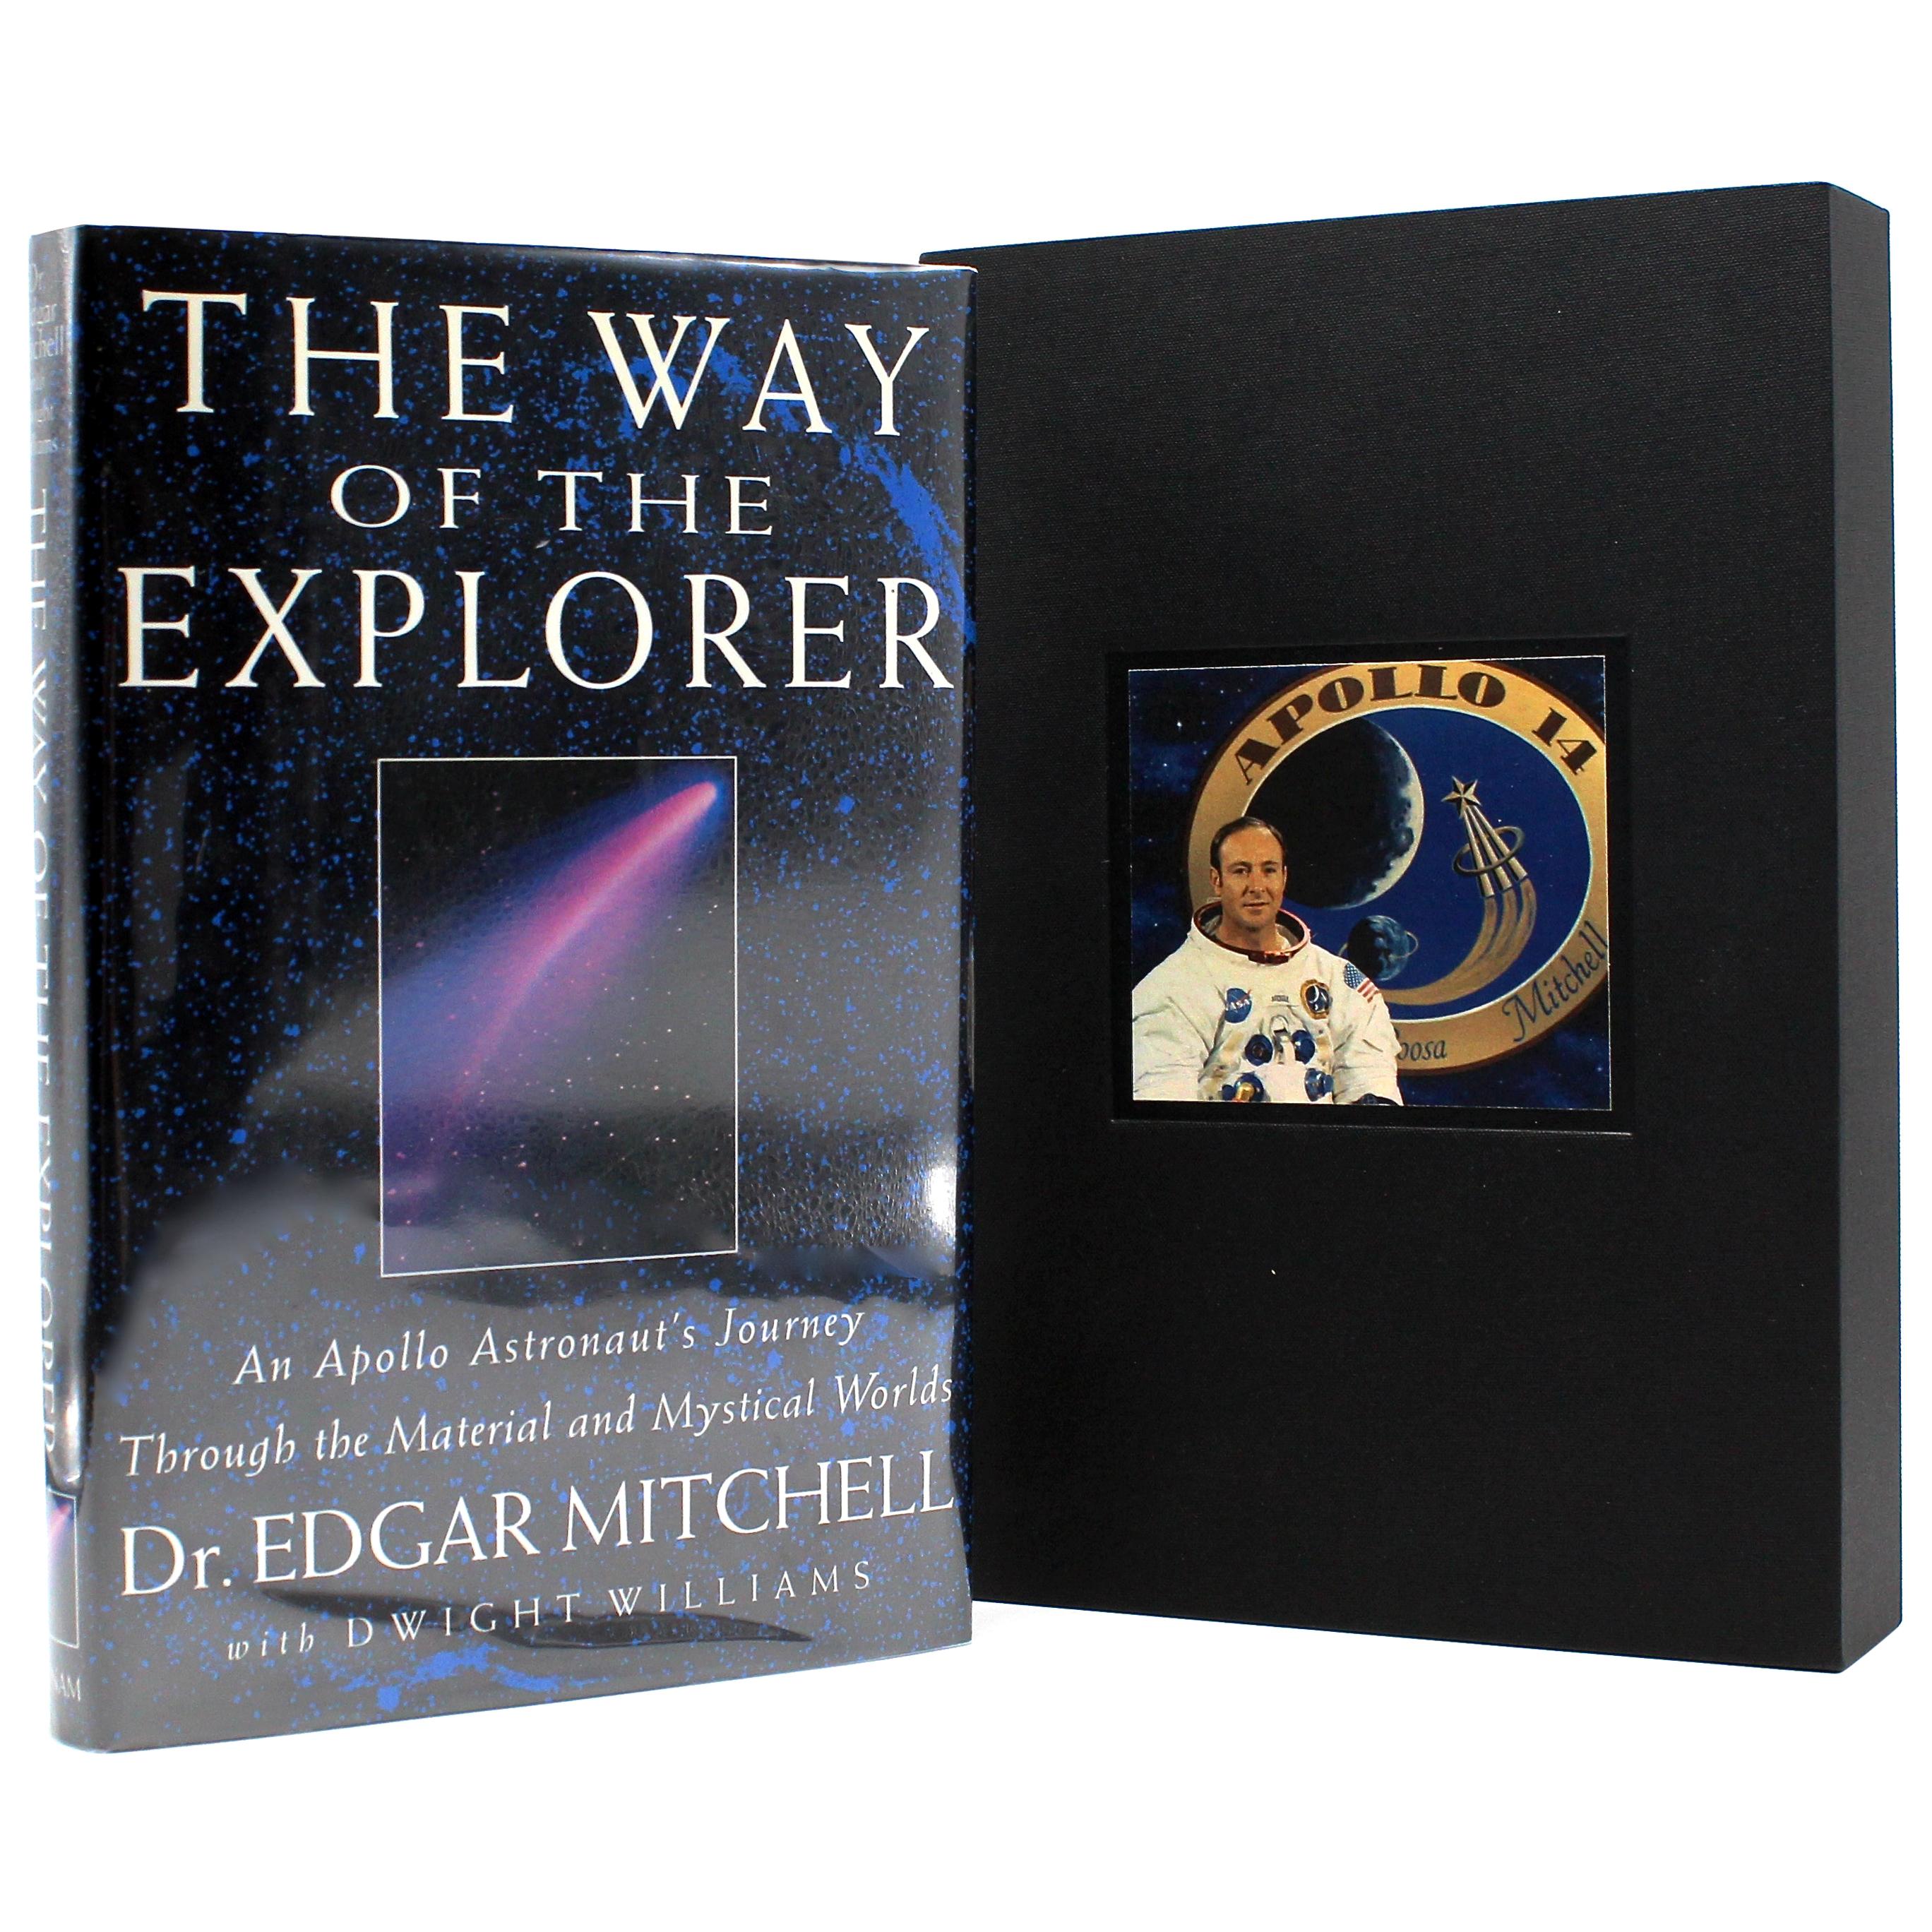 "The Way of the Explorer" Signed by Dr. Edgar Mitchell, First Edition, 1996